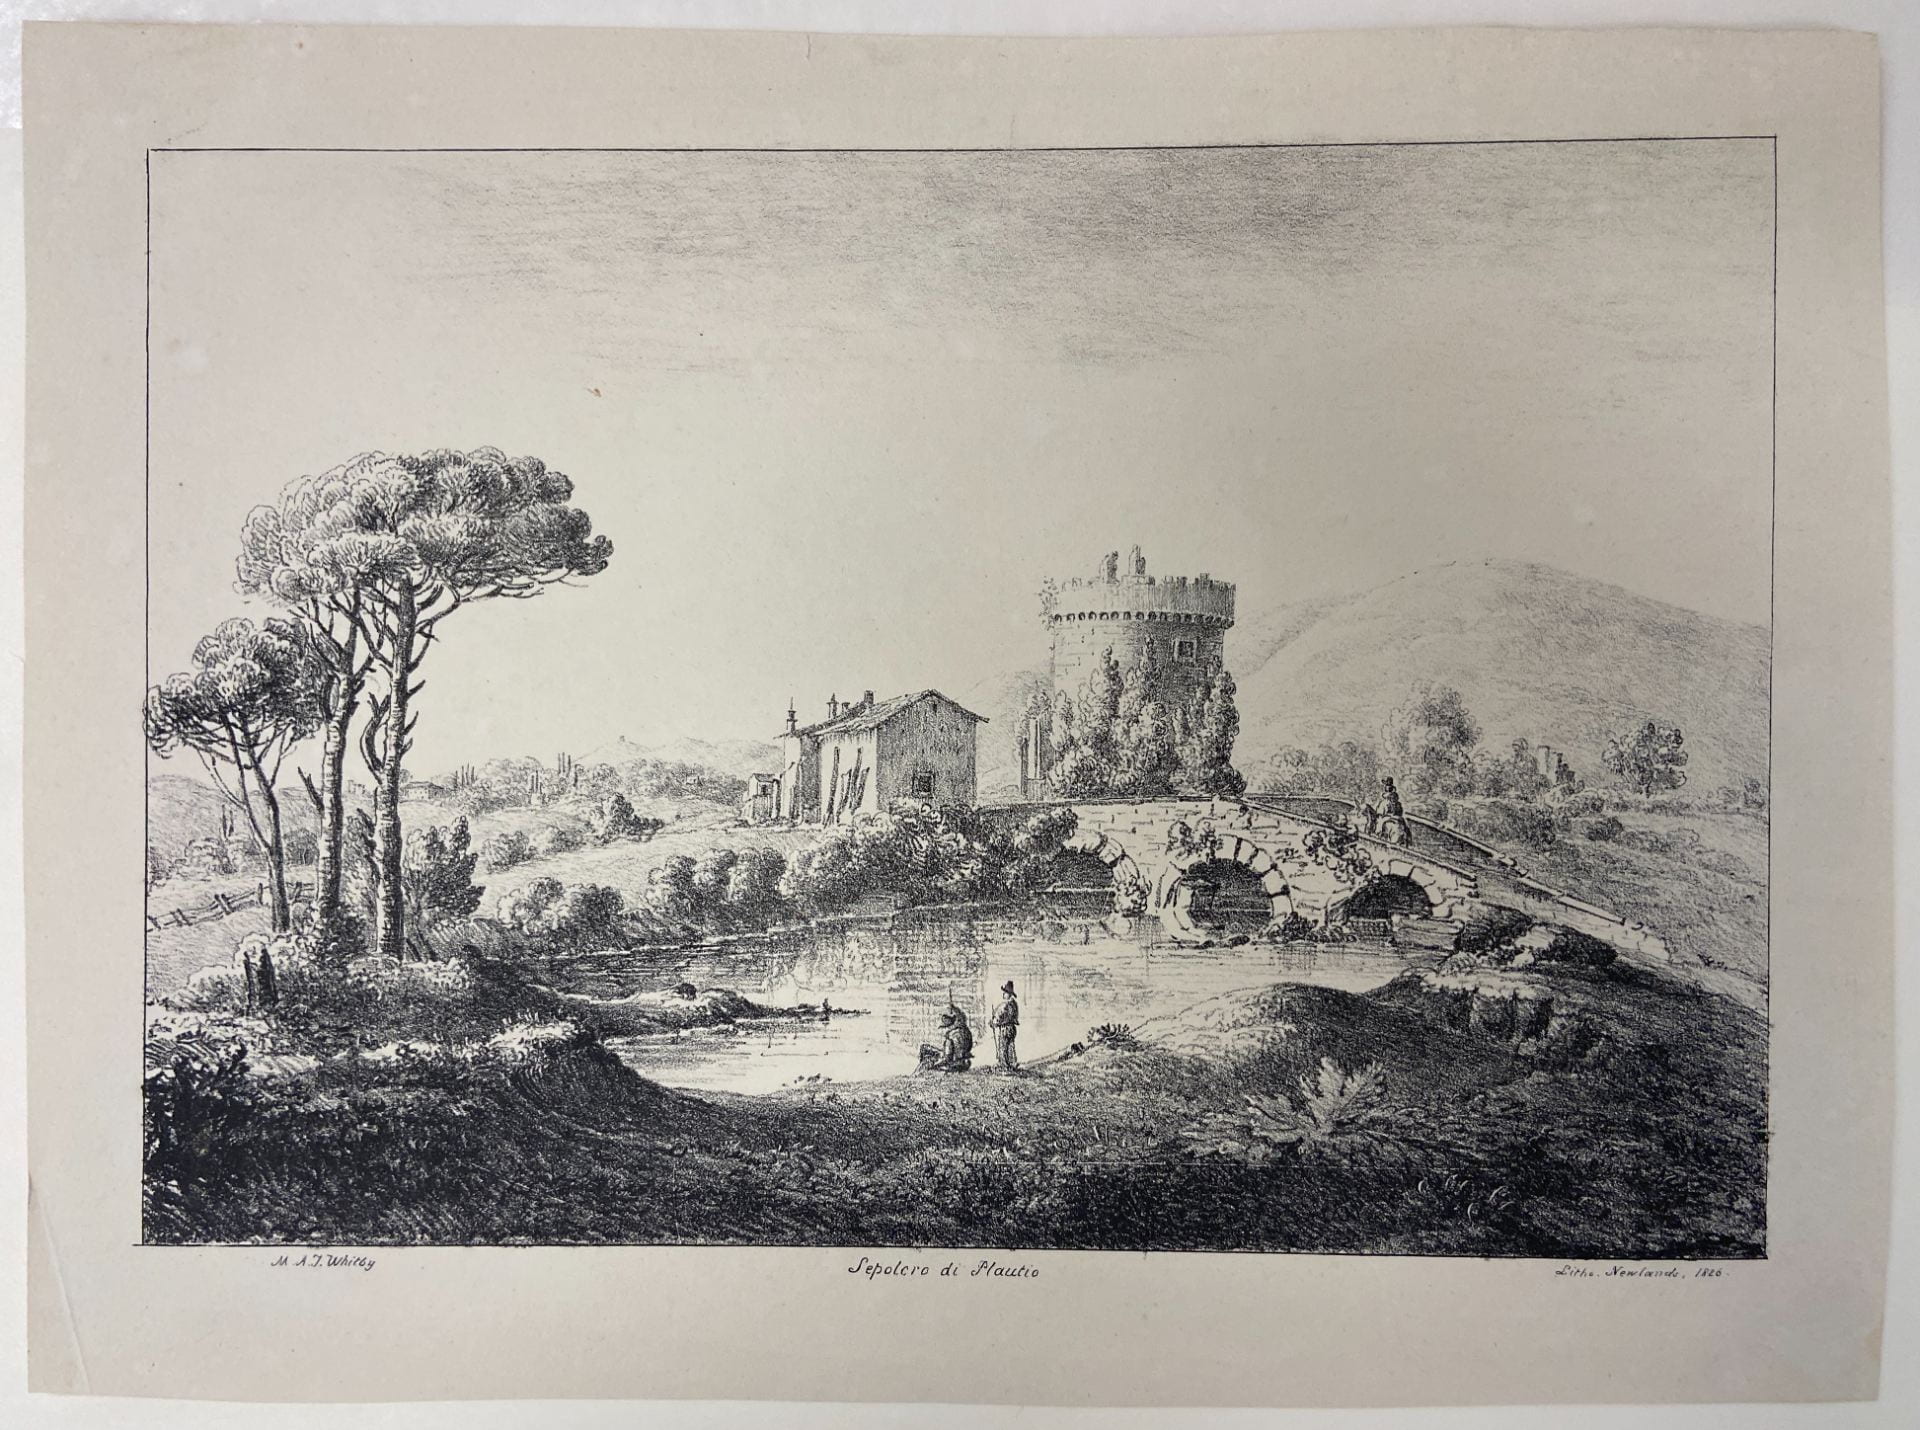 black and white lithograph view of trees on the left, people on a riverbank in the center front, a bridge with one arch on the middle right leading to a crenillated tower and building with peaked roof in the center of the composition, countryside on the middle left, hill behind. 